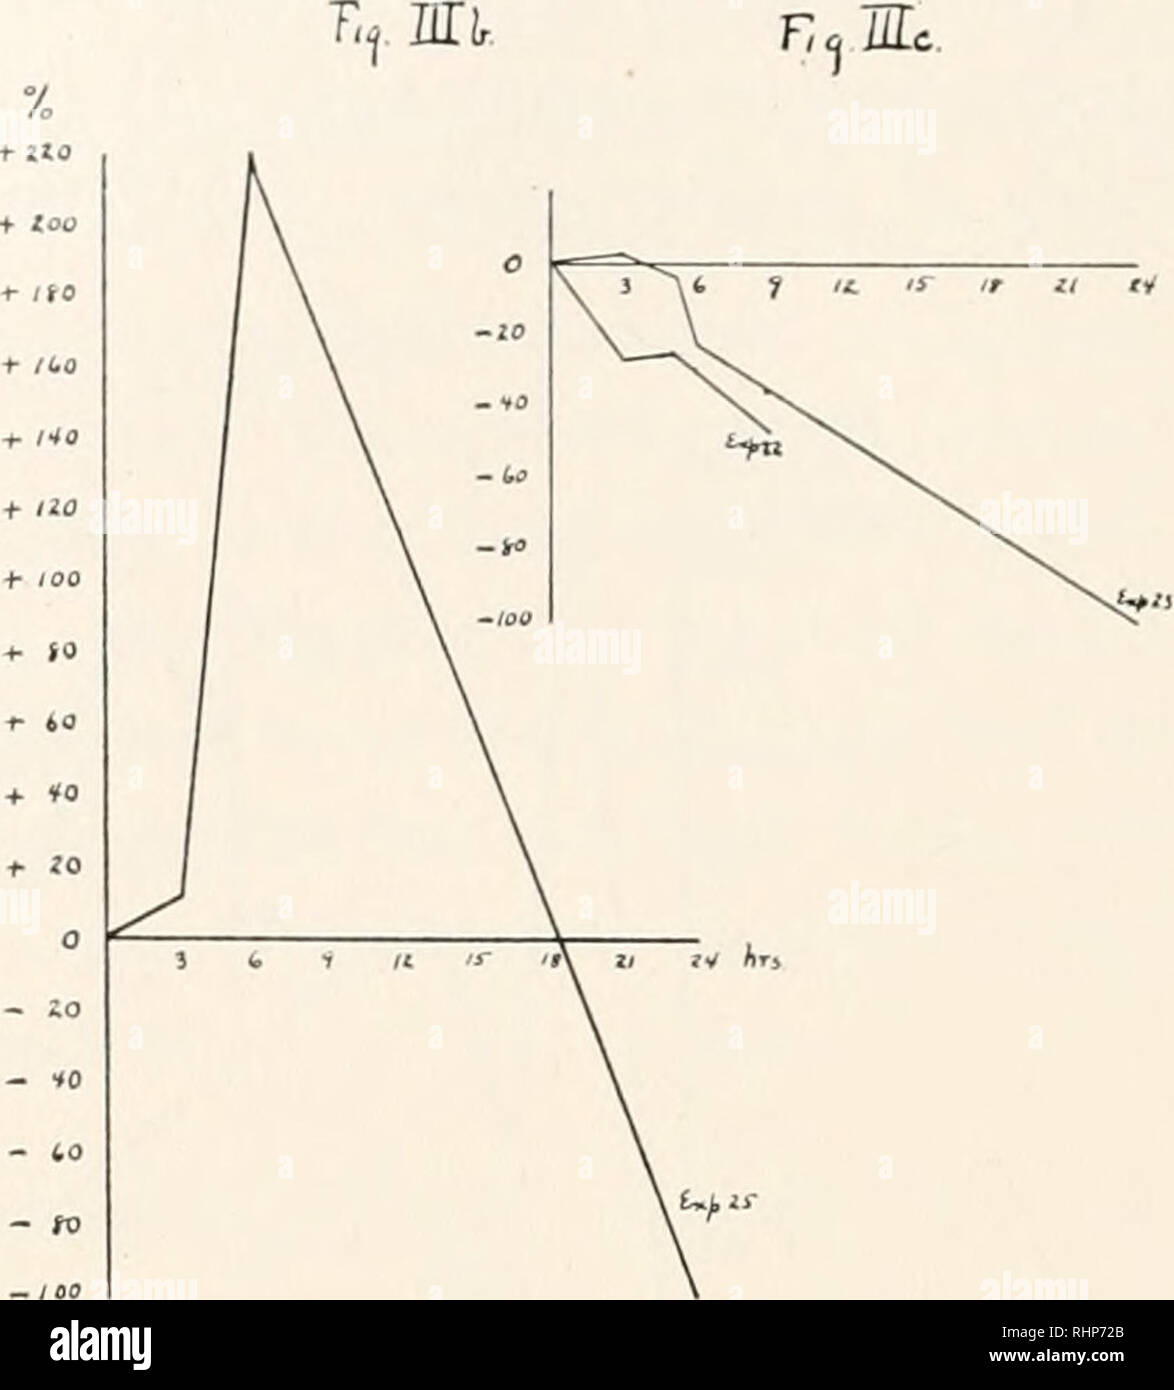 . The Biological bulletin. Biology; Zoology; Biology; Marine Biology. FIG. 30. The agglutination cycle when sperm alone are aged and when the sperm are ripe at the time of shedding. This figure shows the marked, progressive, but slower increase in agglutinability with age. FIG. 3&amp;. The curve for ageing sperm, when the sperm is moderately overripe when shed, showing the precocious and large increase in agglutinability, and the very rapid decrease thereafter. FIG. 3c. The agglutination cycle for ageing sperm, when the sperm were more overripe at the time of shedding. This shows a progressive Stock Photo